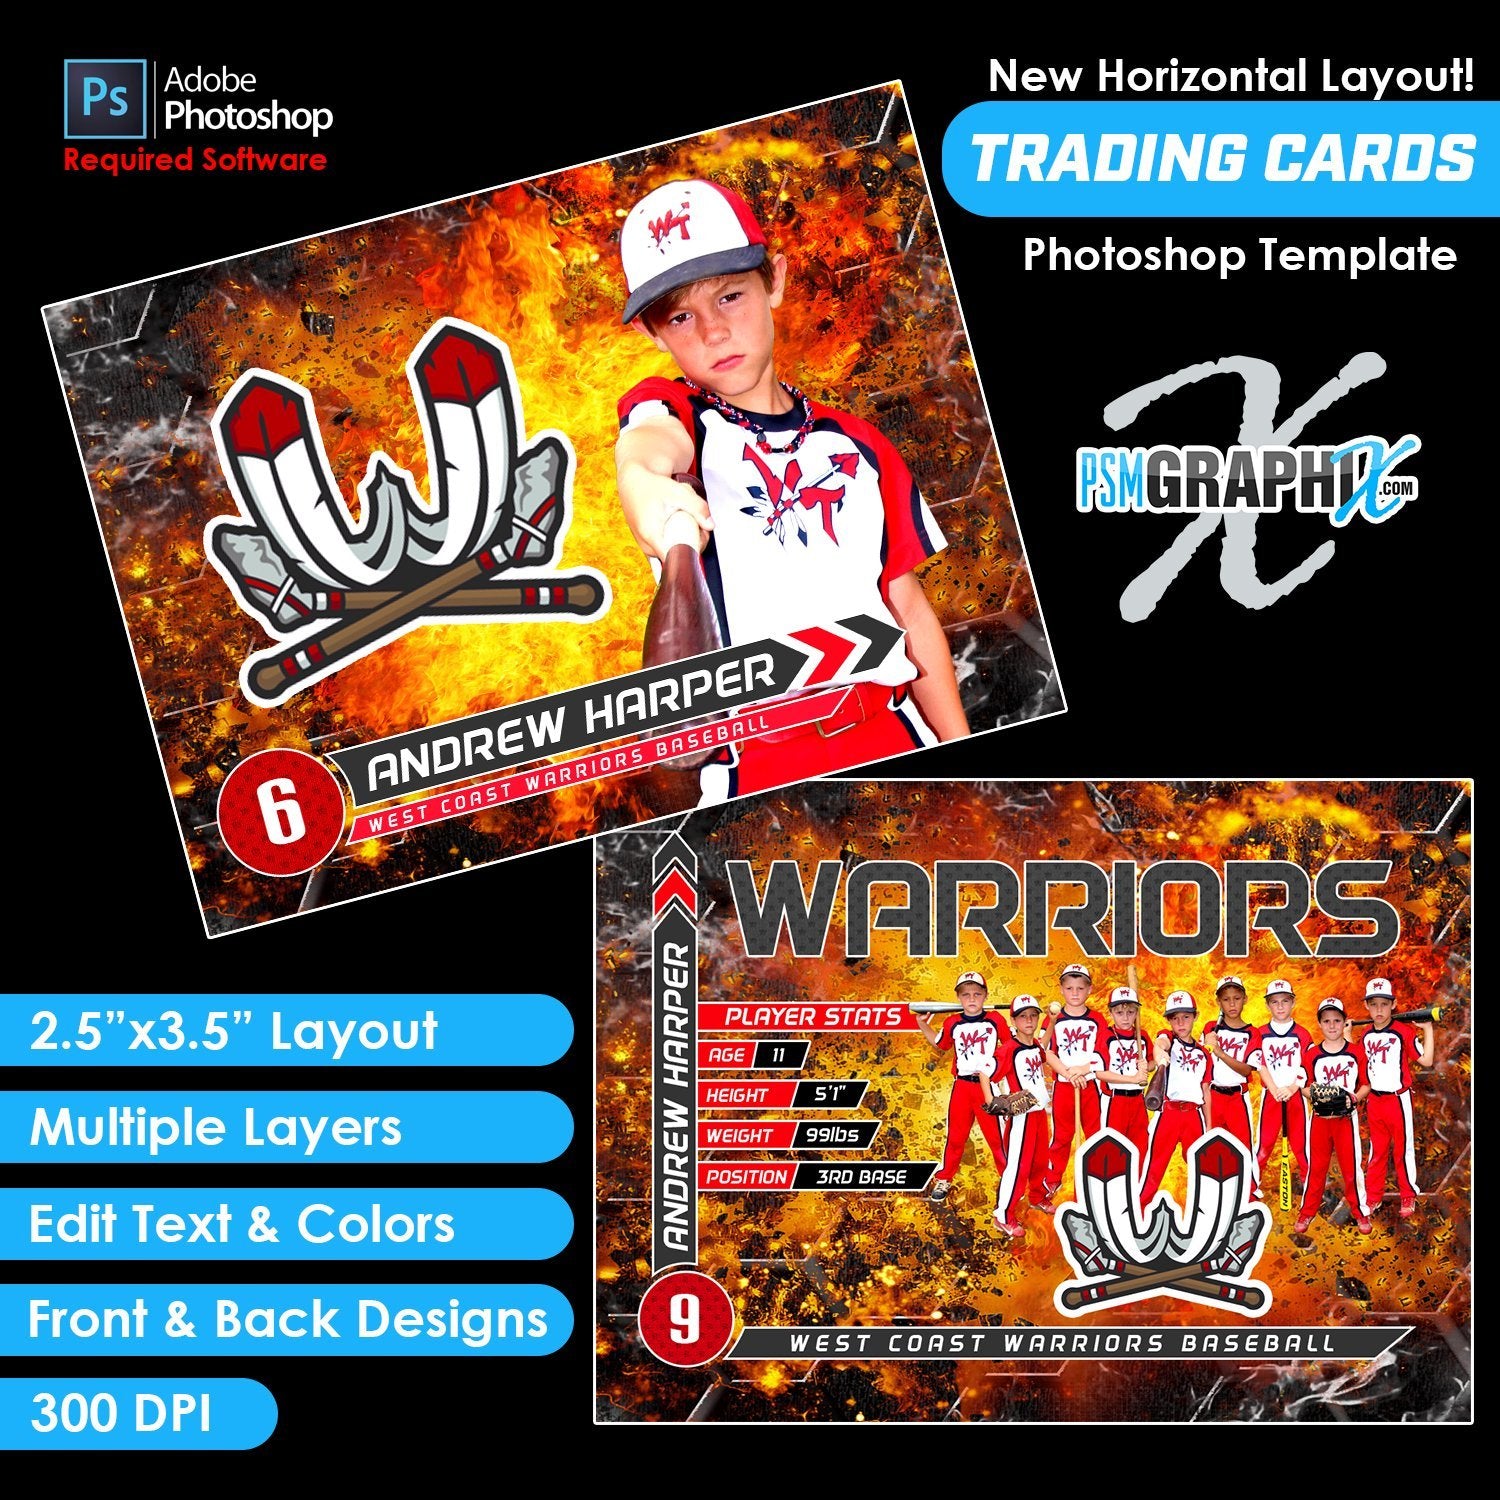 V3 - Full Set - Game Day Trading Card Templates-Photoshop Template - PSMGraphix